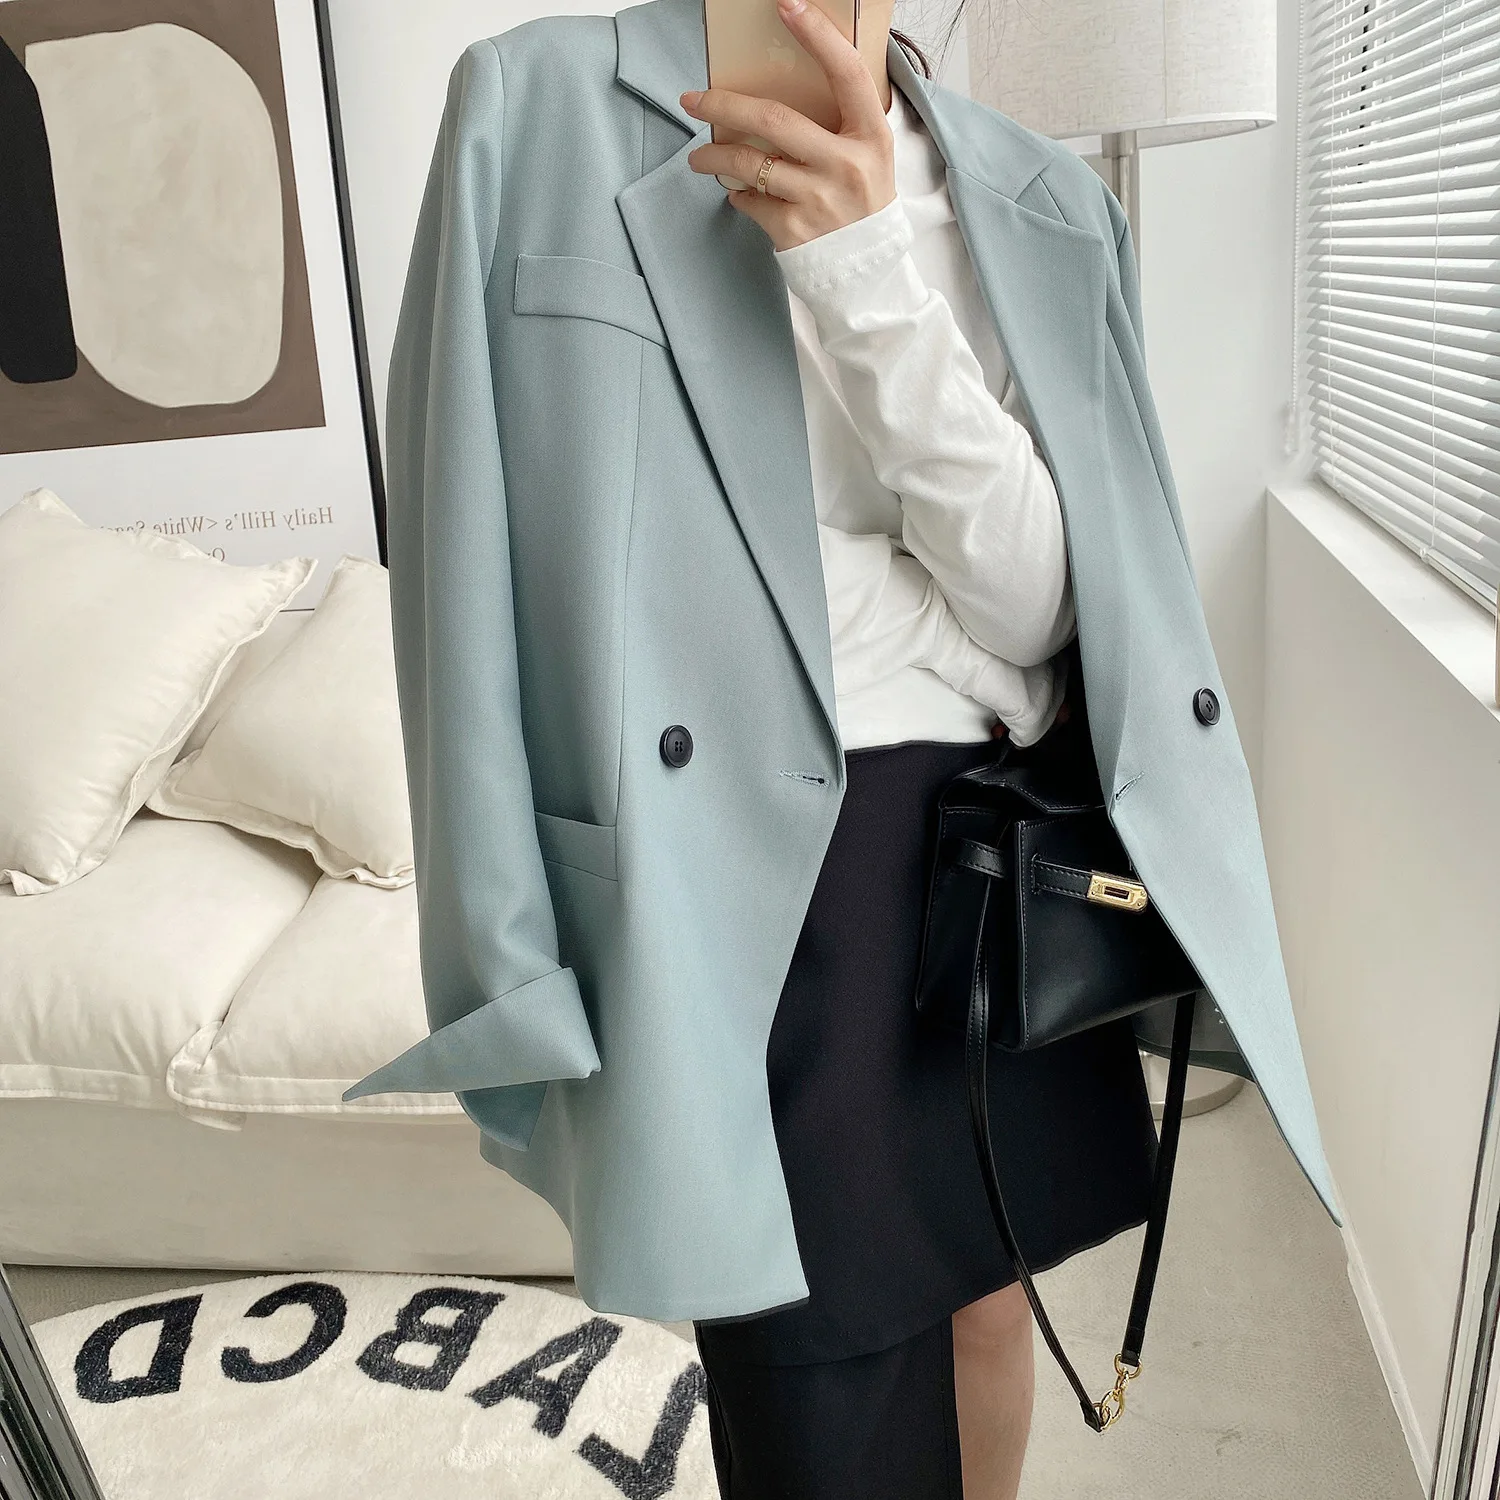 2021 Spring Solid Color Temperament Blazers Korean Fashion Casual Long Sleeve V-neck Blue Cardigan Loose Jacket Women's Clothes casual blazer fashion and white suit 2021 spring autumn women blazers coat new ladies temperament casual striped jacket